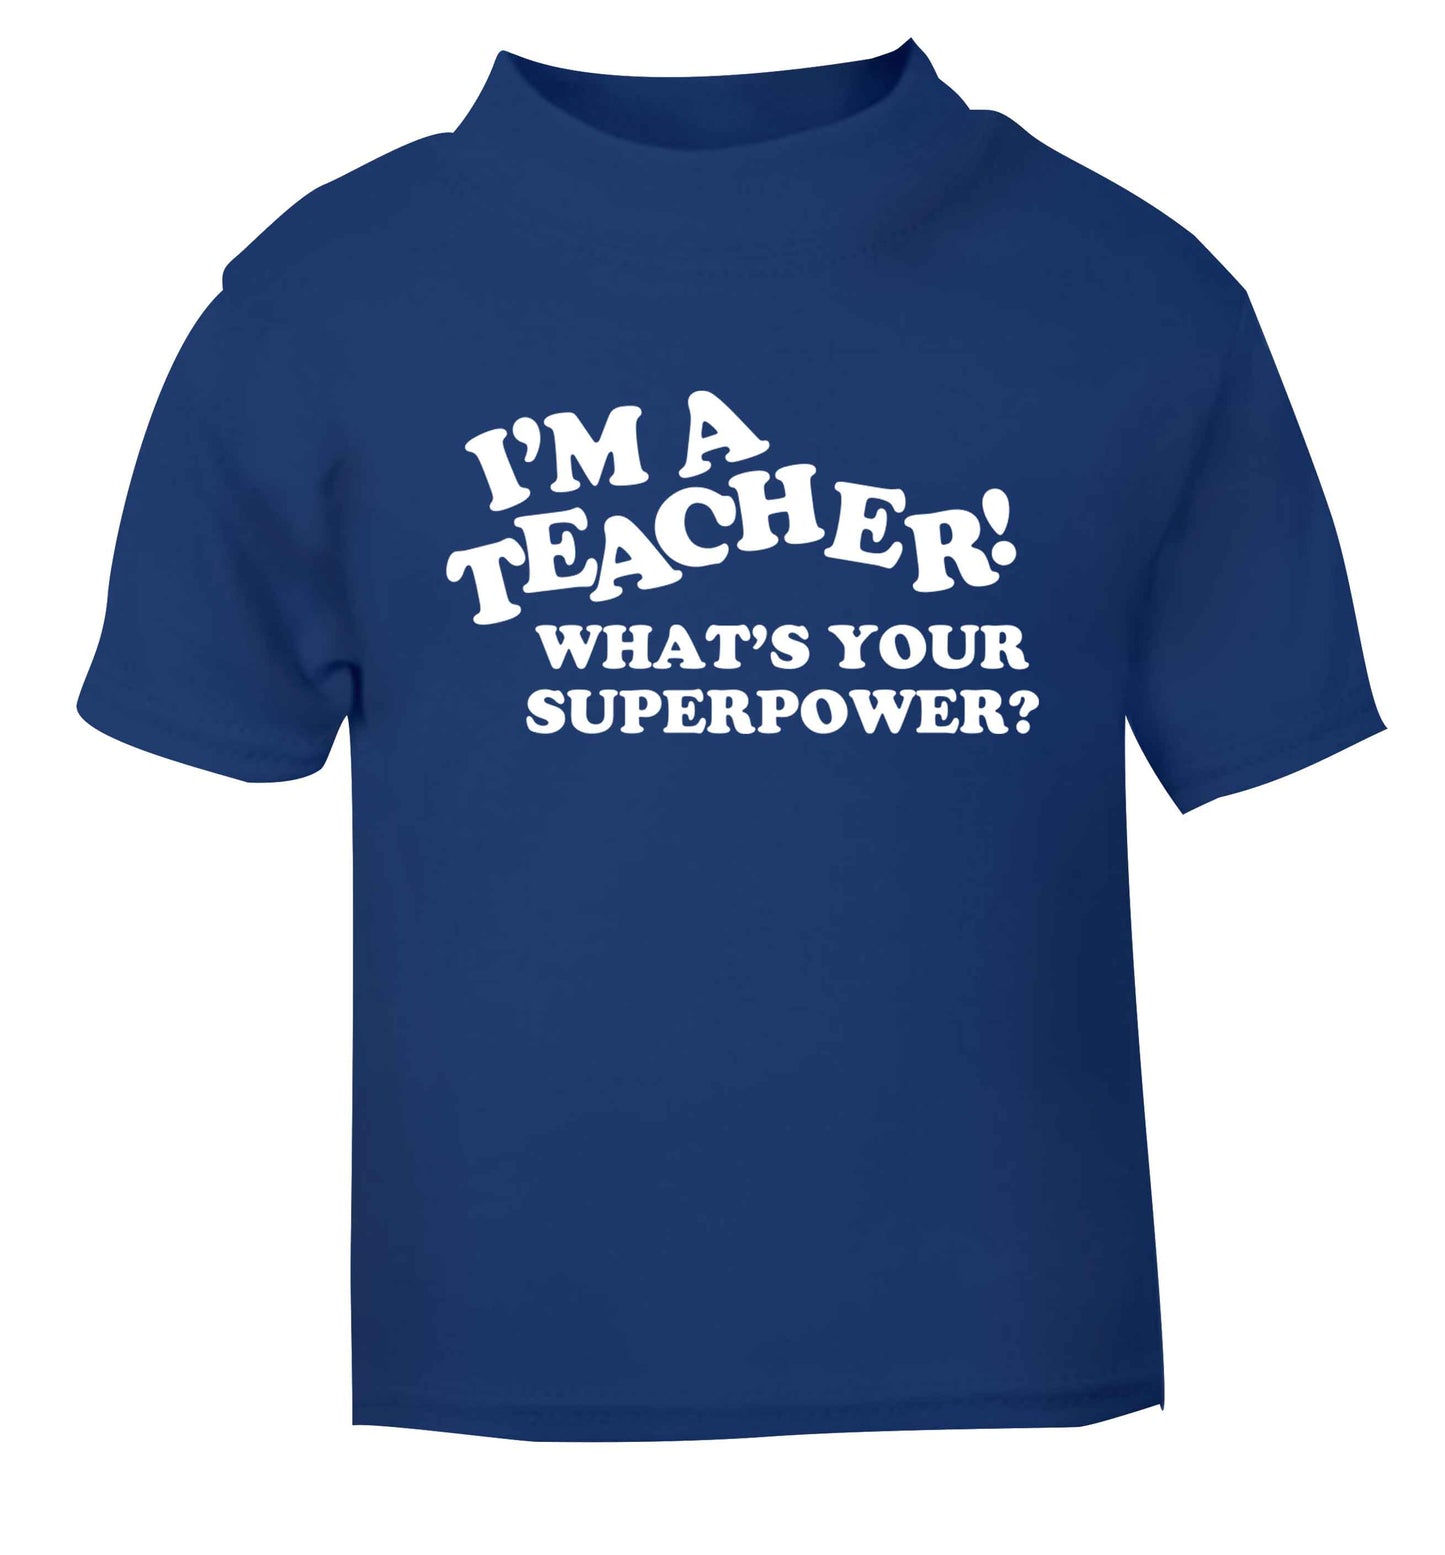 I'm a teacher what's your superpower?! blue baby toddler Tshirt 2 Years